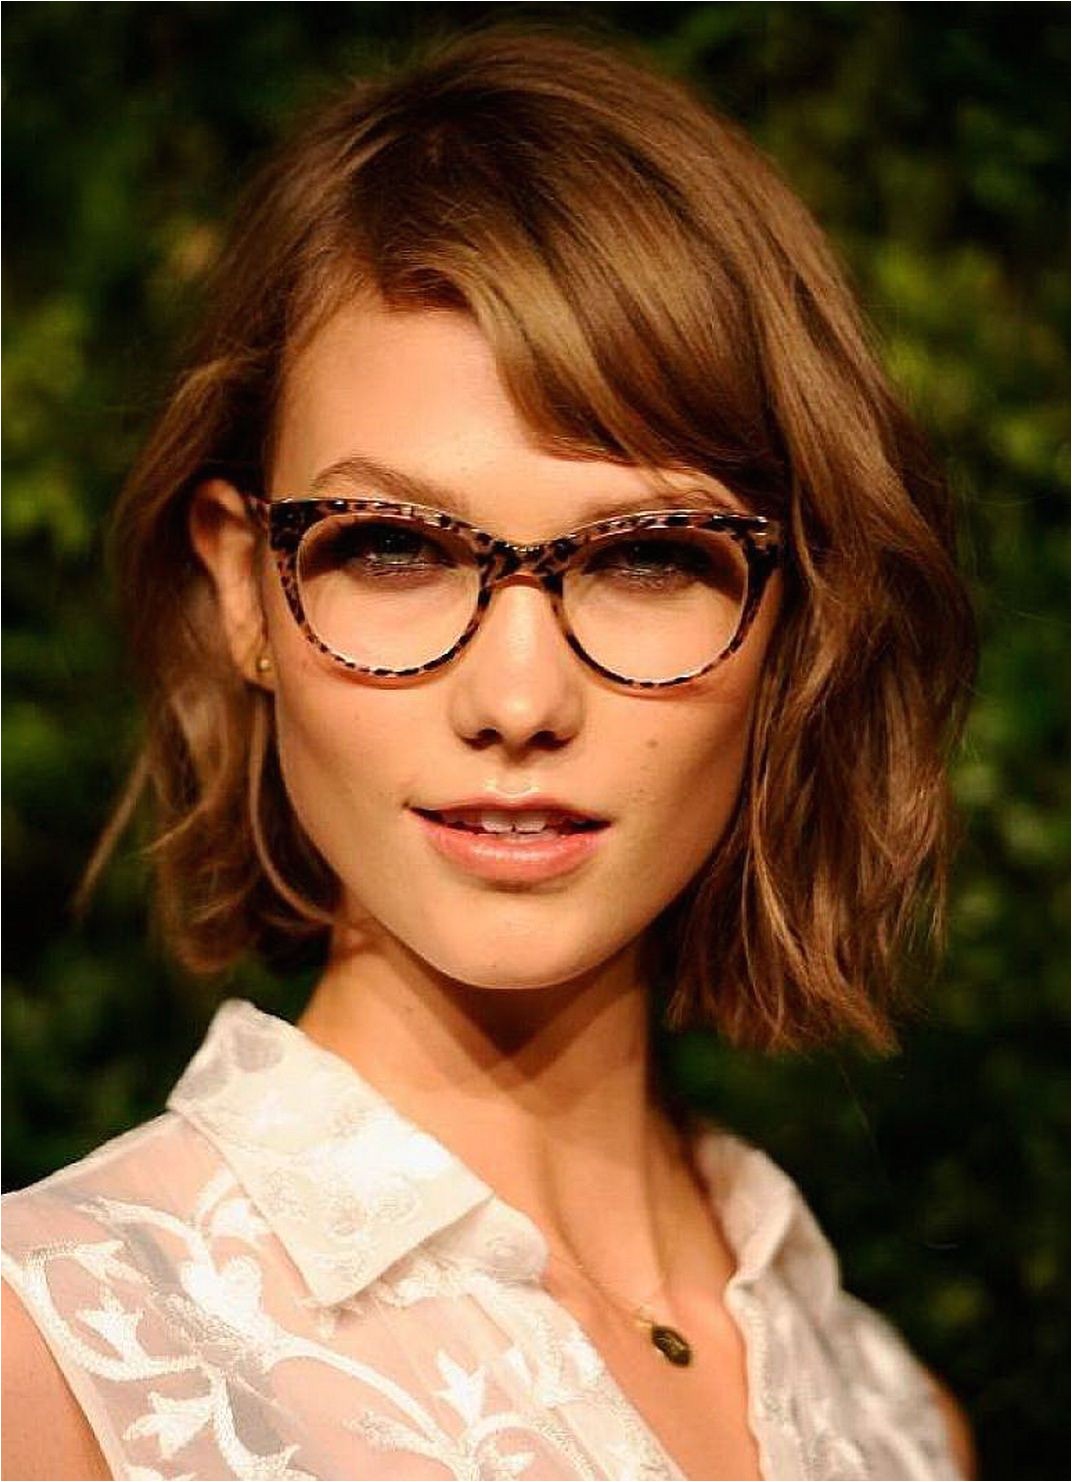 Long Hairstyles for Girls with Glasses Best Wavy Short Hair Hairstyles with Side Bangs for Women with